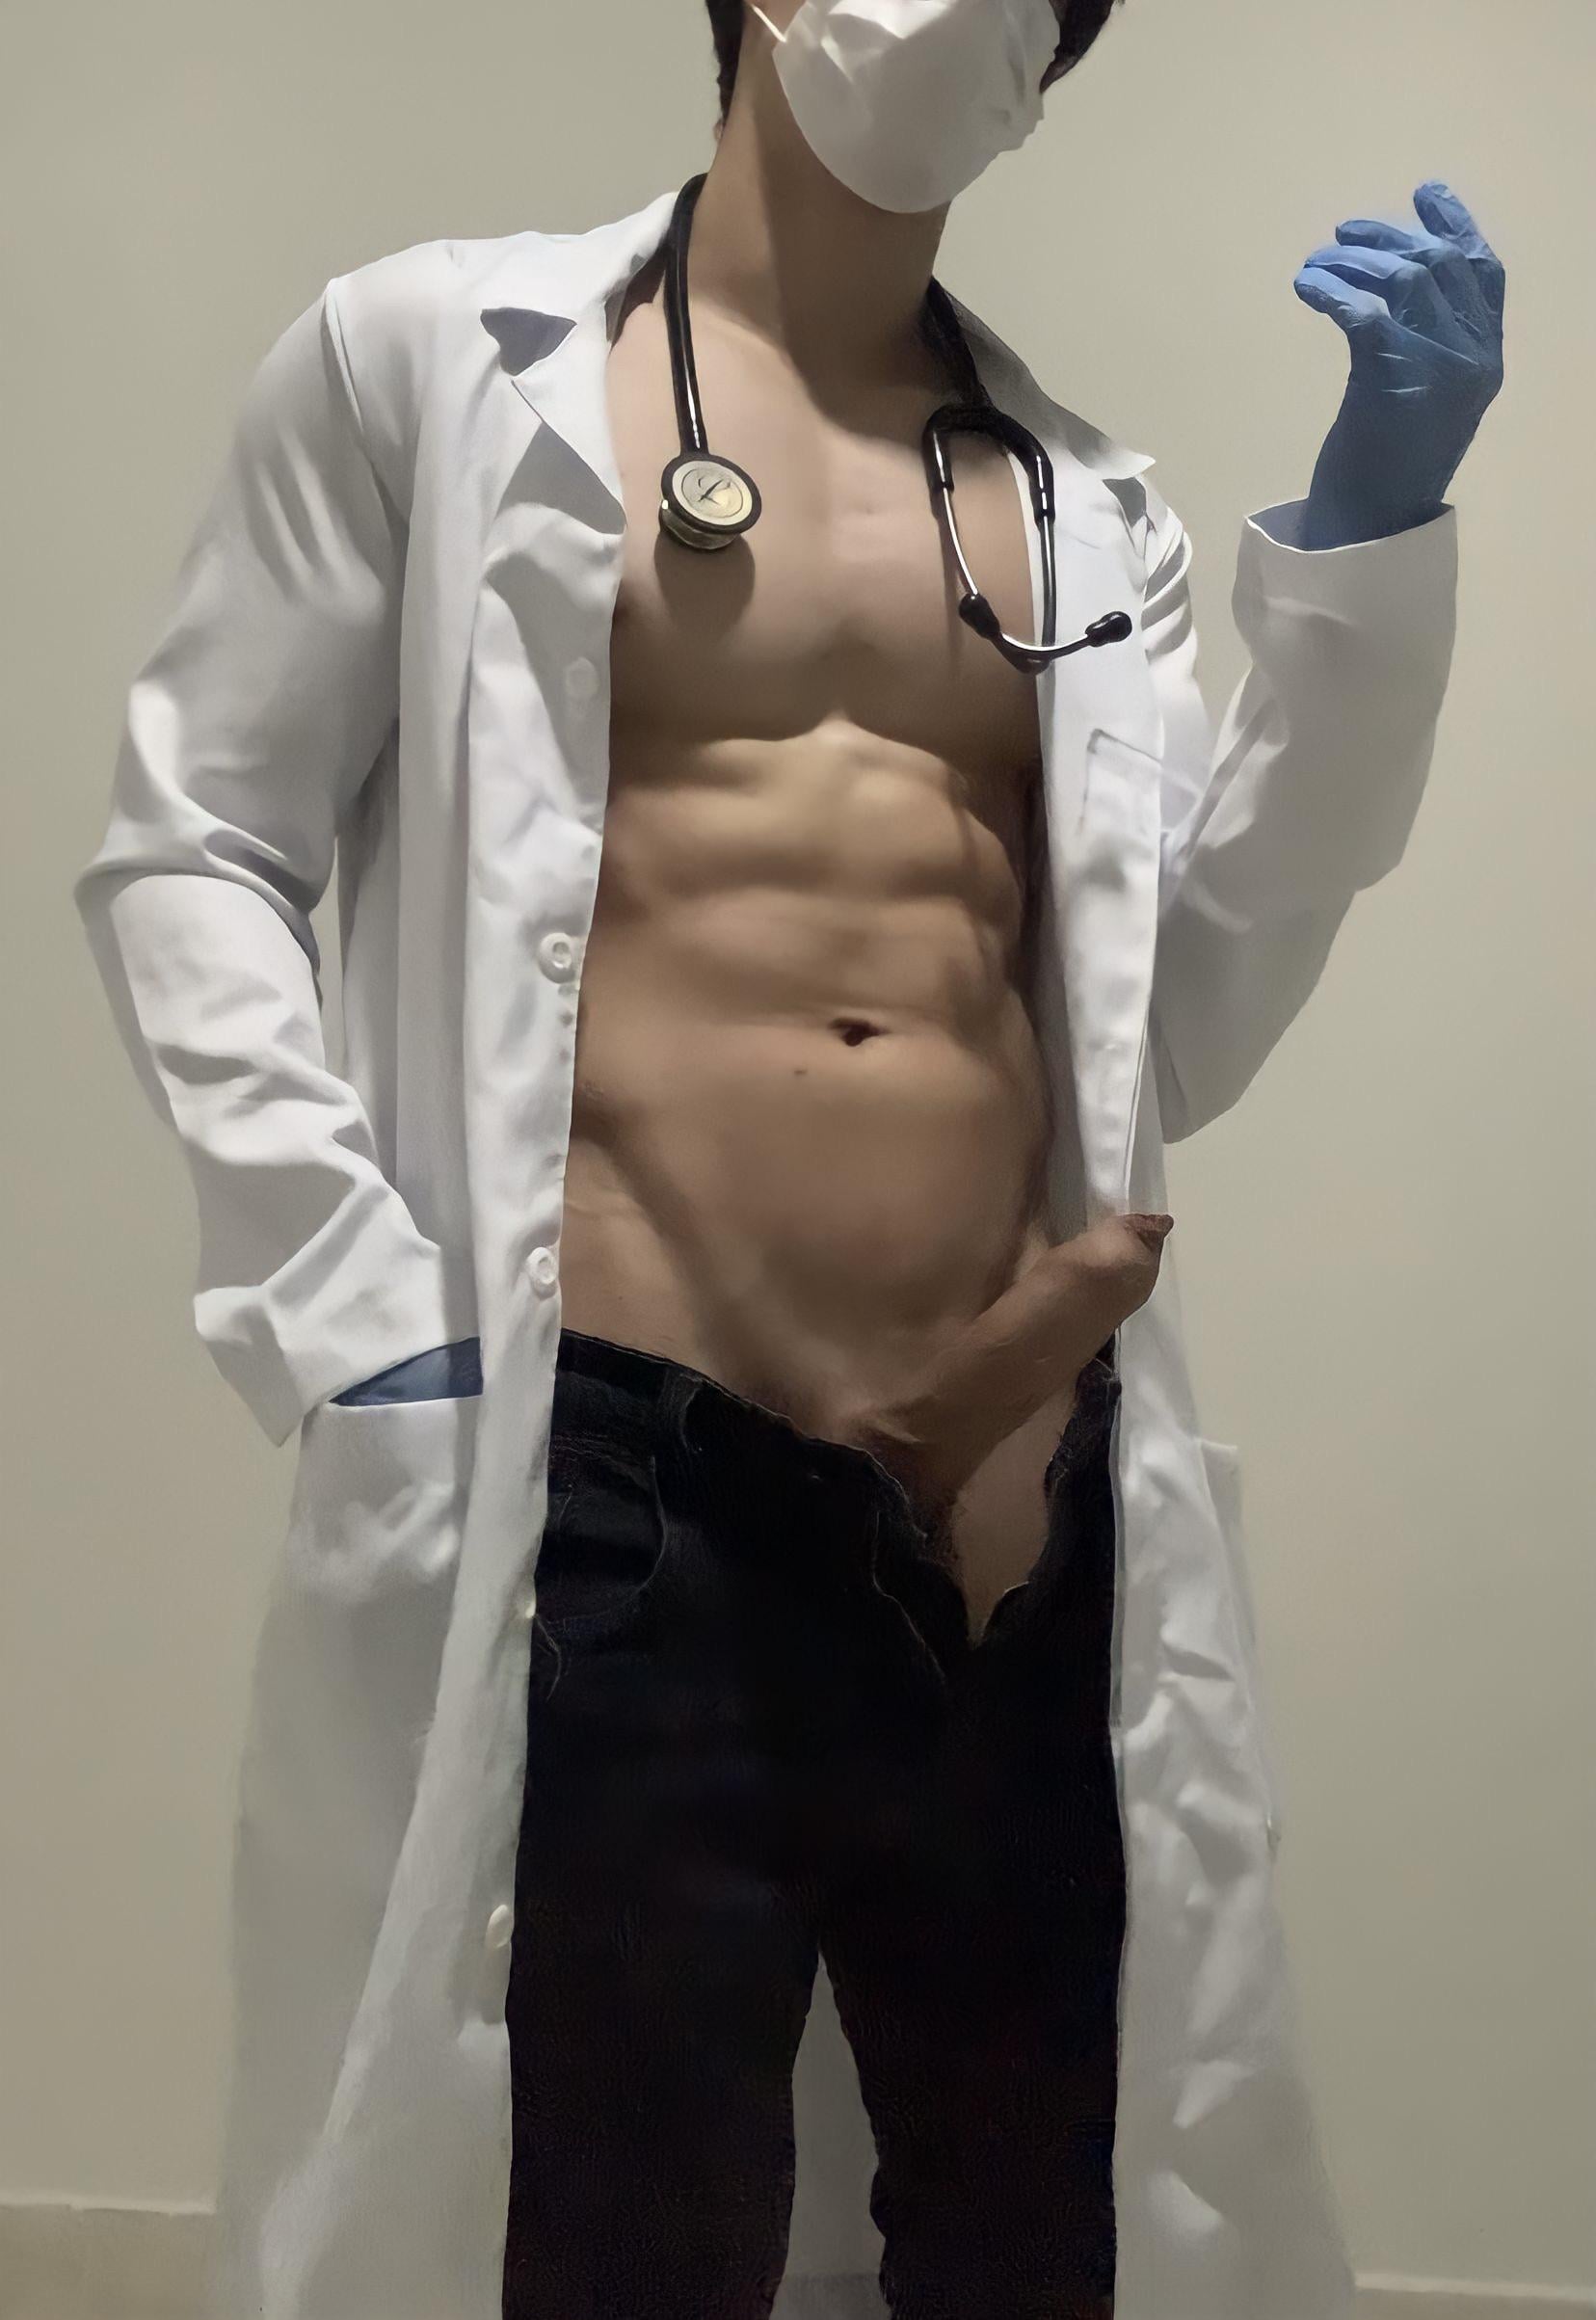 If I were your doctor which exam would you want